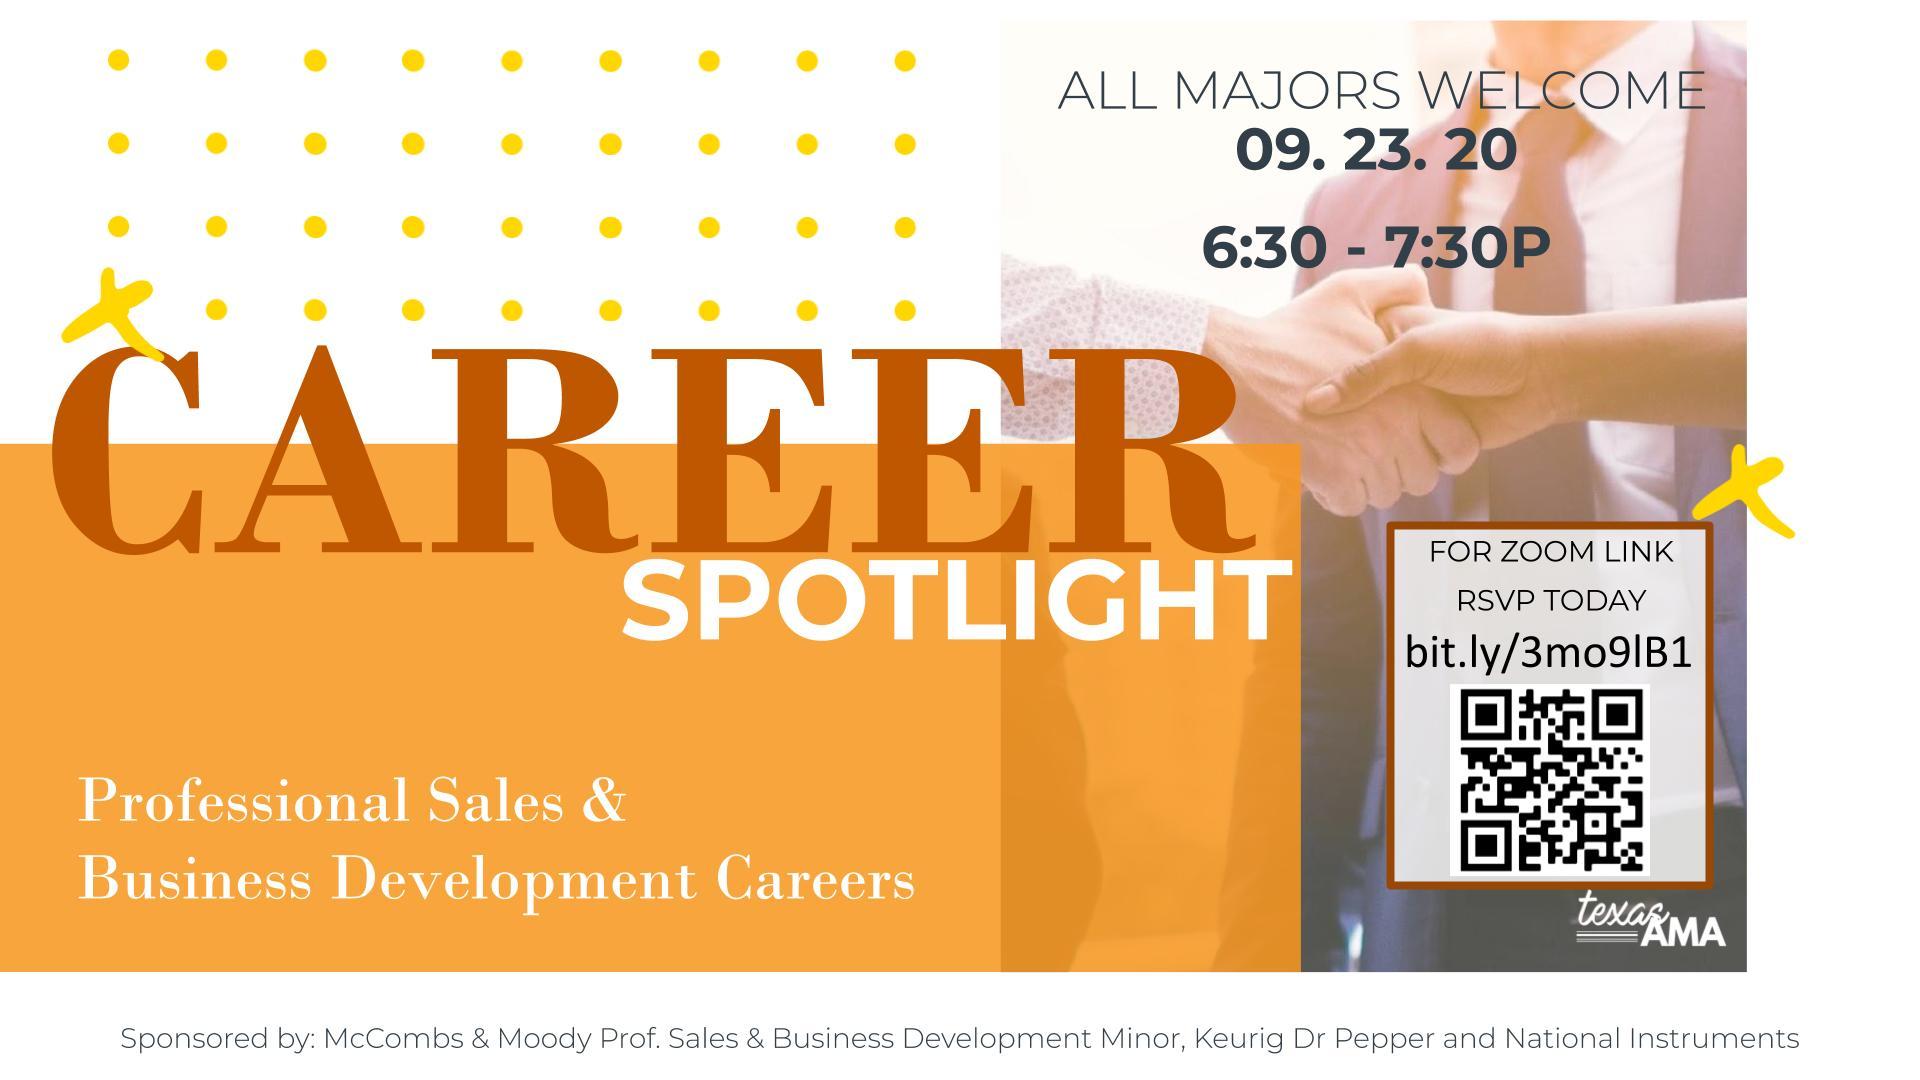 INFO on SALES CAREERS EVENT on 9 23 20 with RSVP link